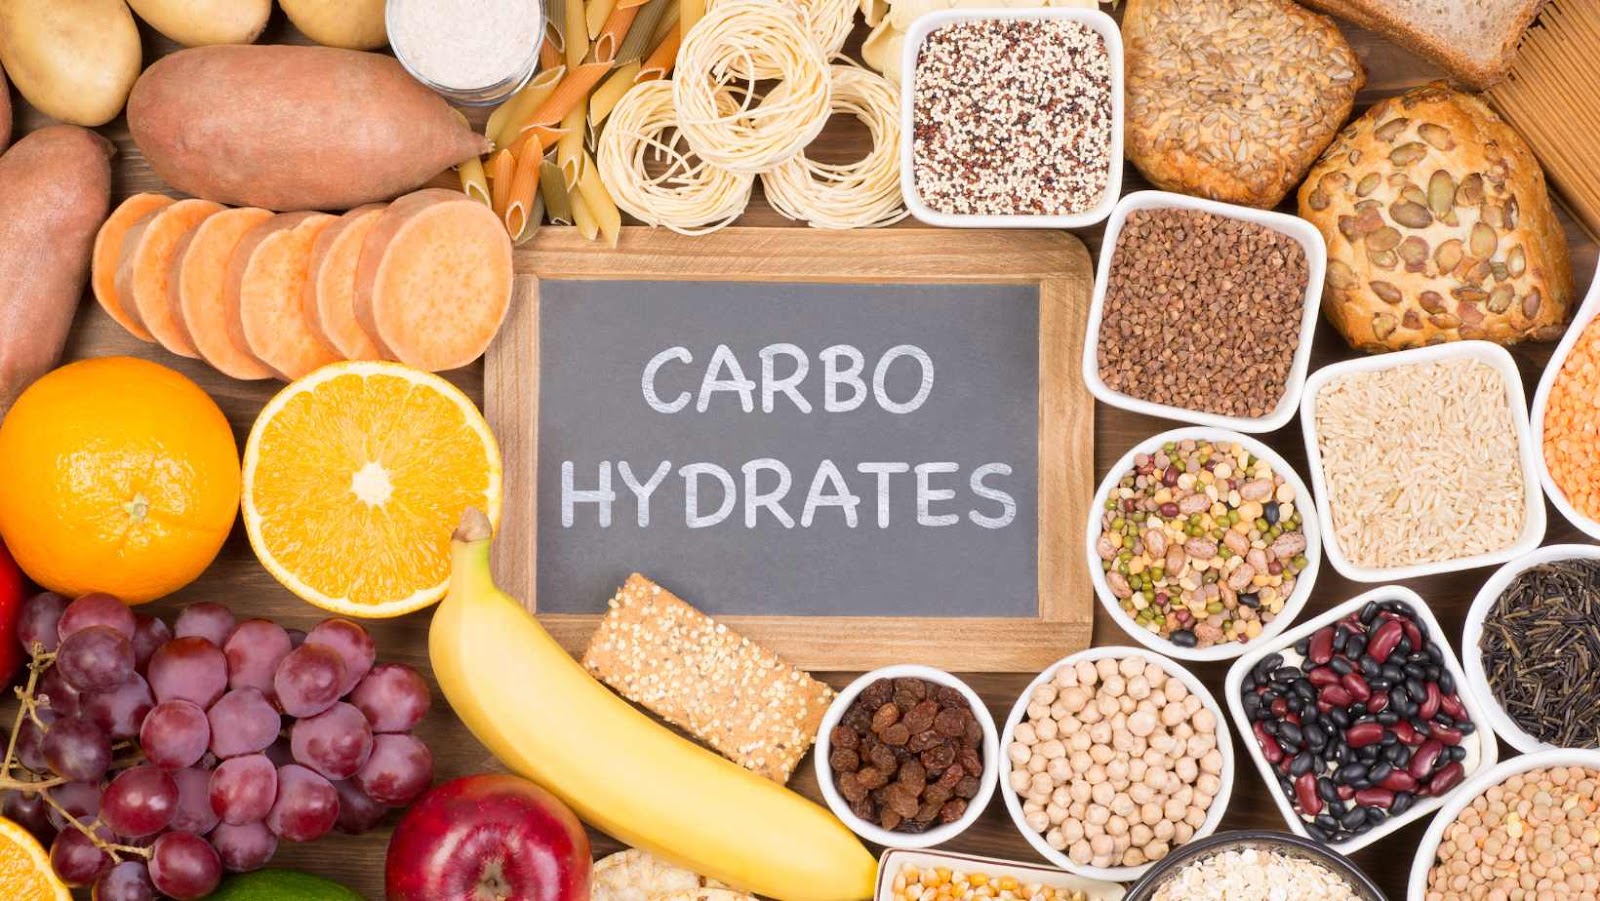 Are There Any Health Risks Associated With Eating Too Many Carbohydrates?